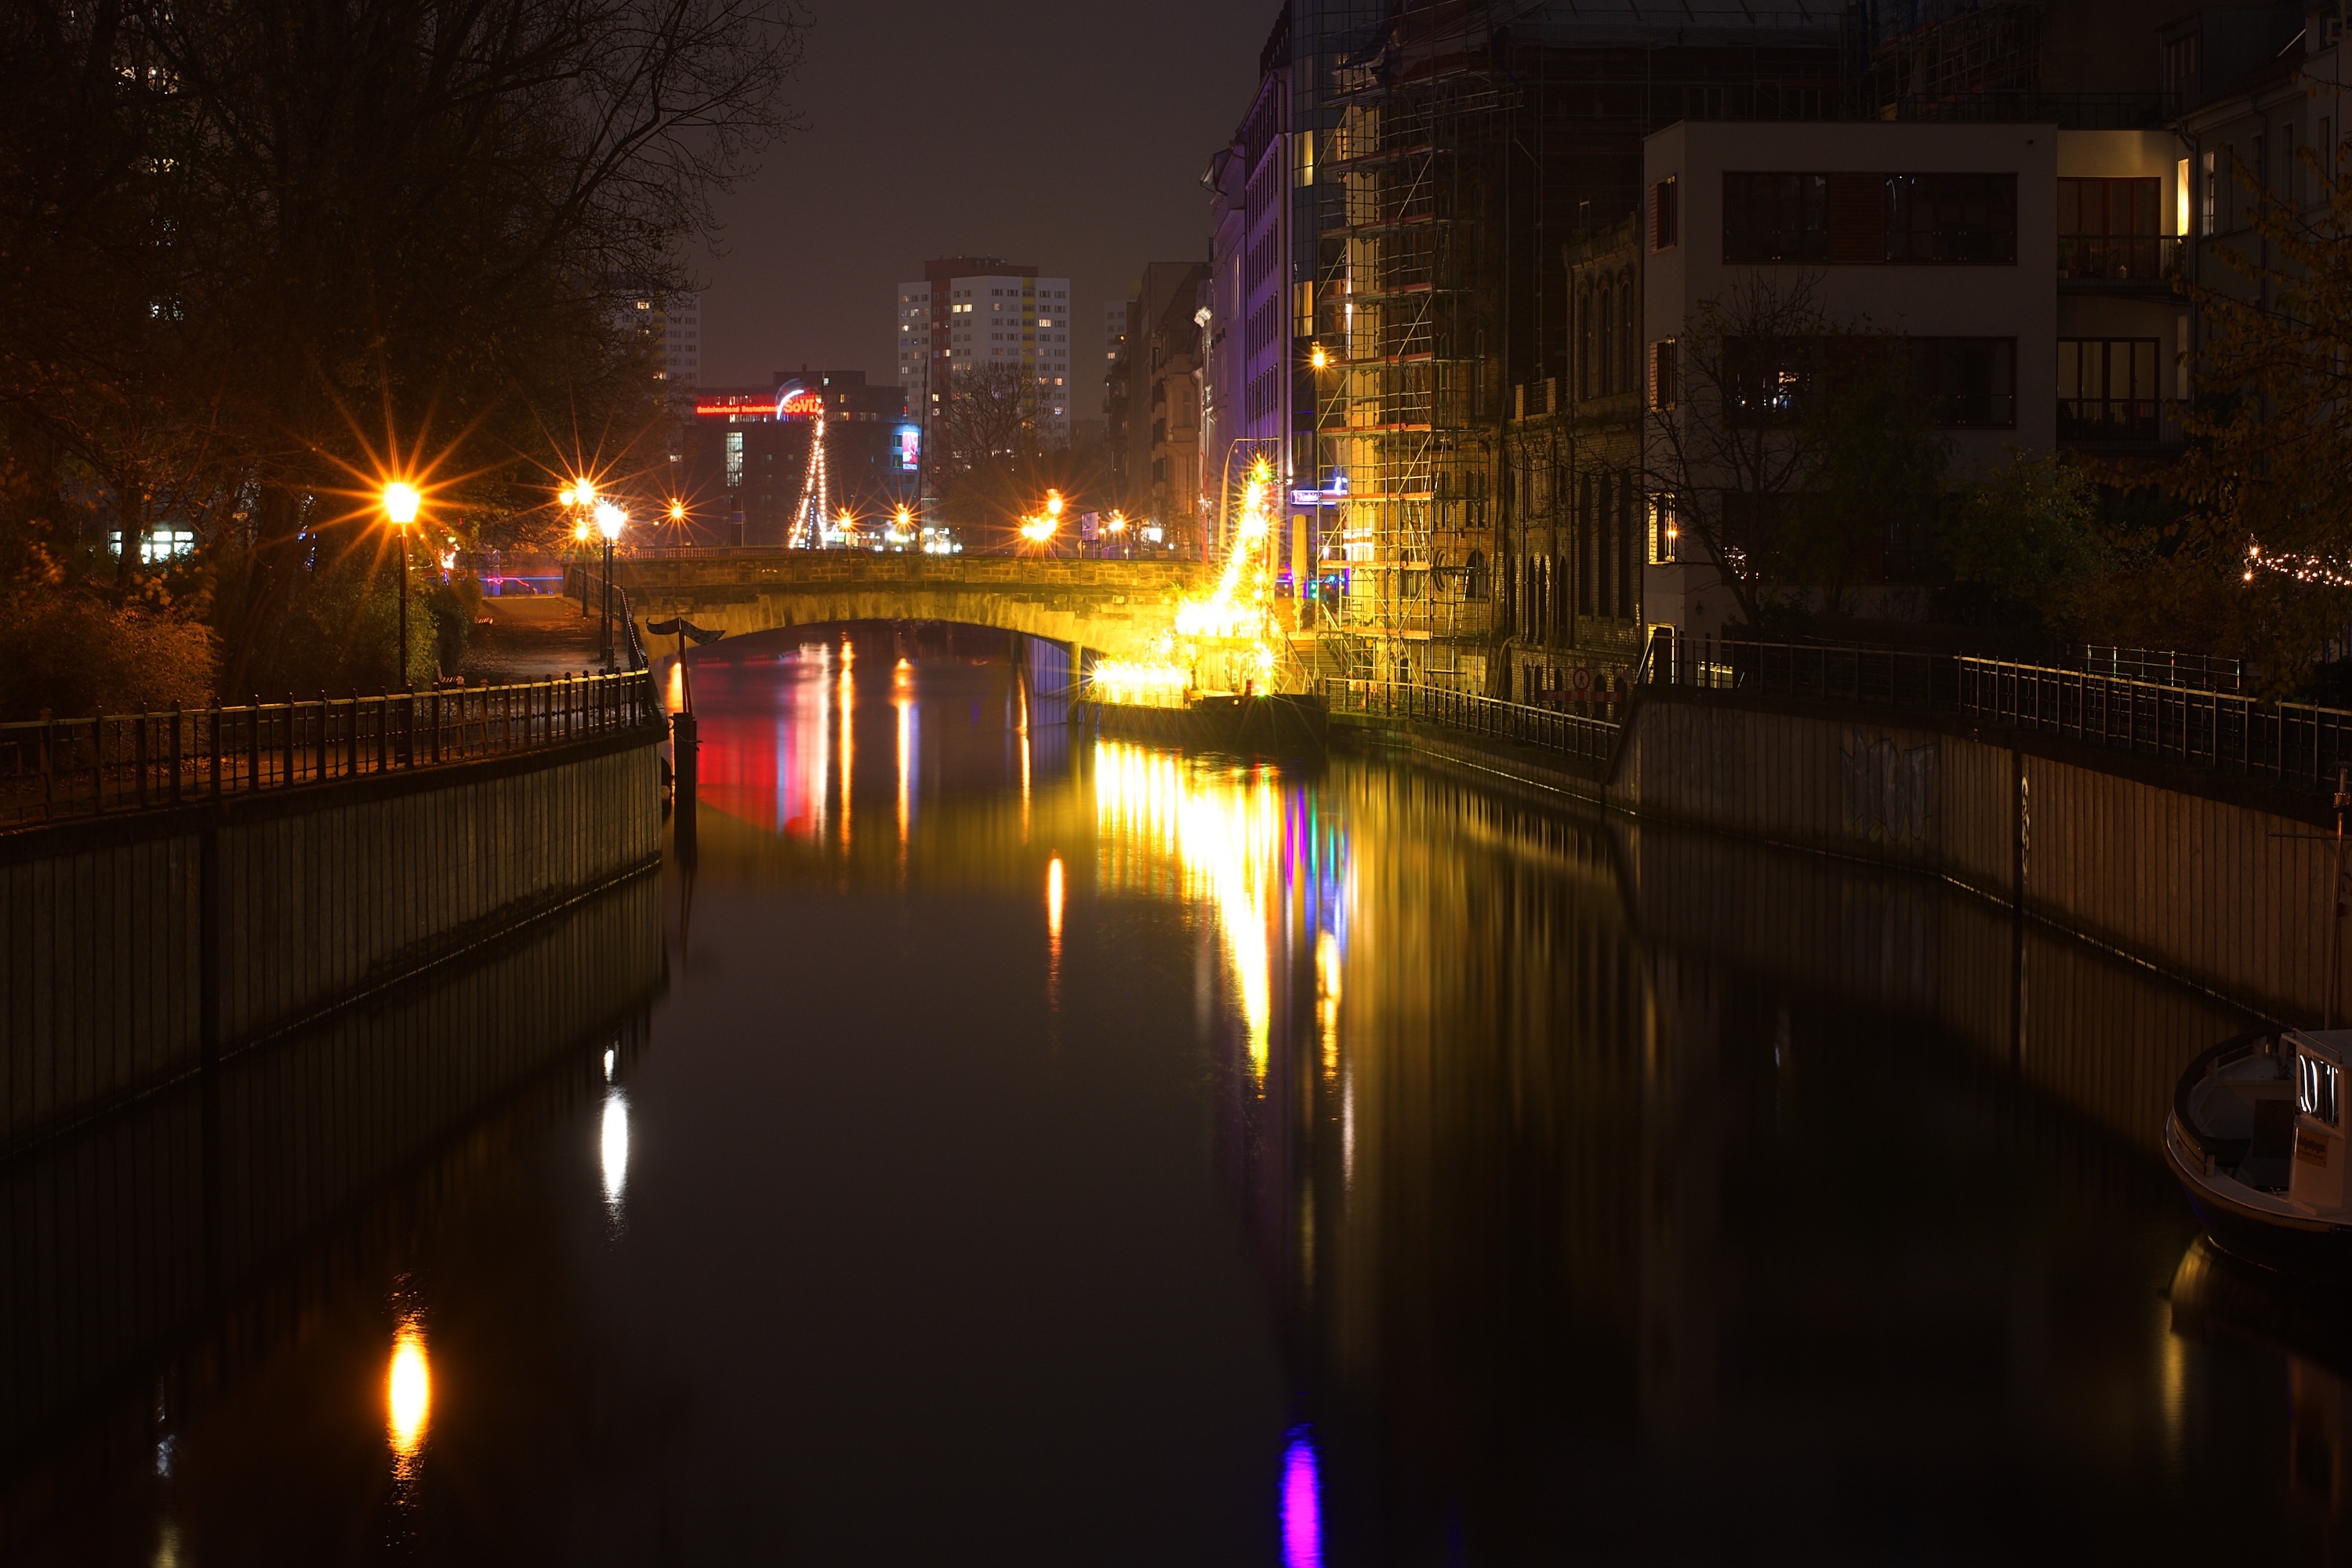 picture of a river in the centre of the frame at night. There is  construction scaffolding on one building to the right, a tall apartment or  office building in the distance, and the surrounding lights are all  reflected in the river-water.